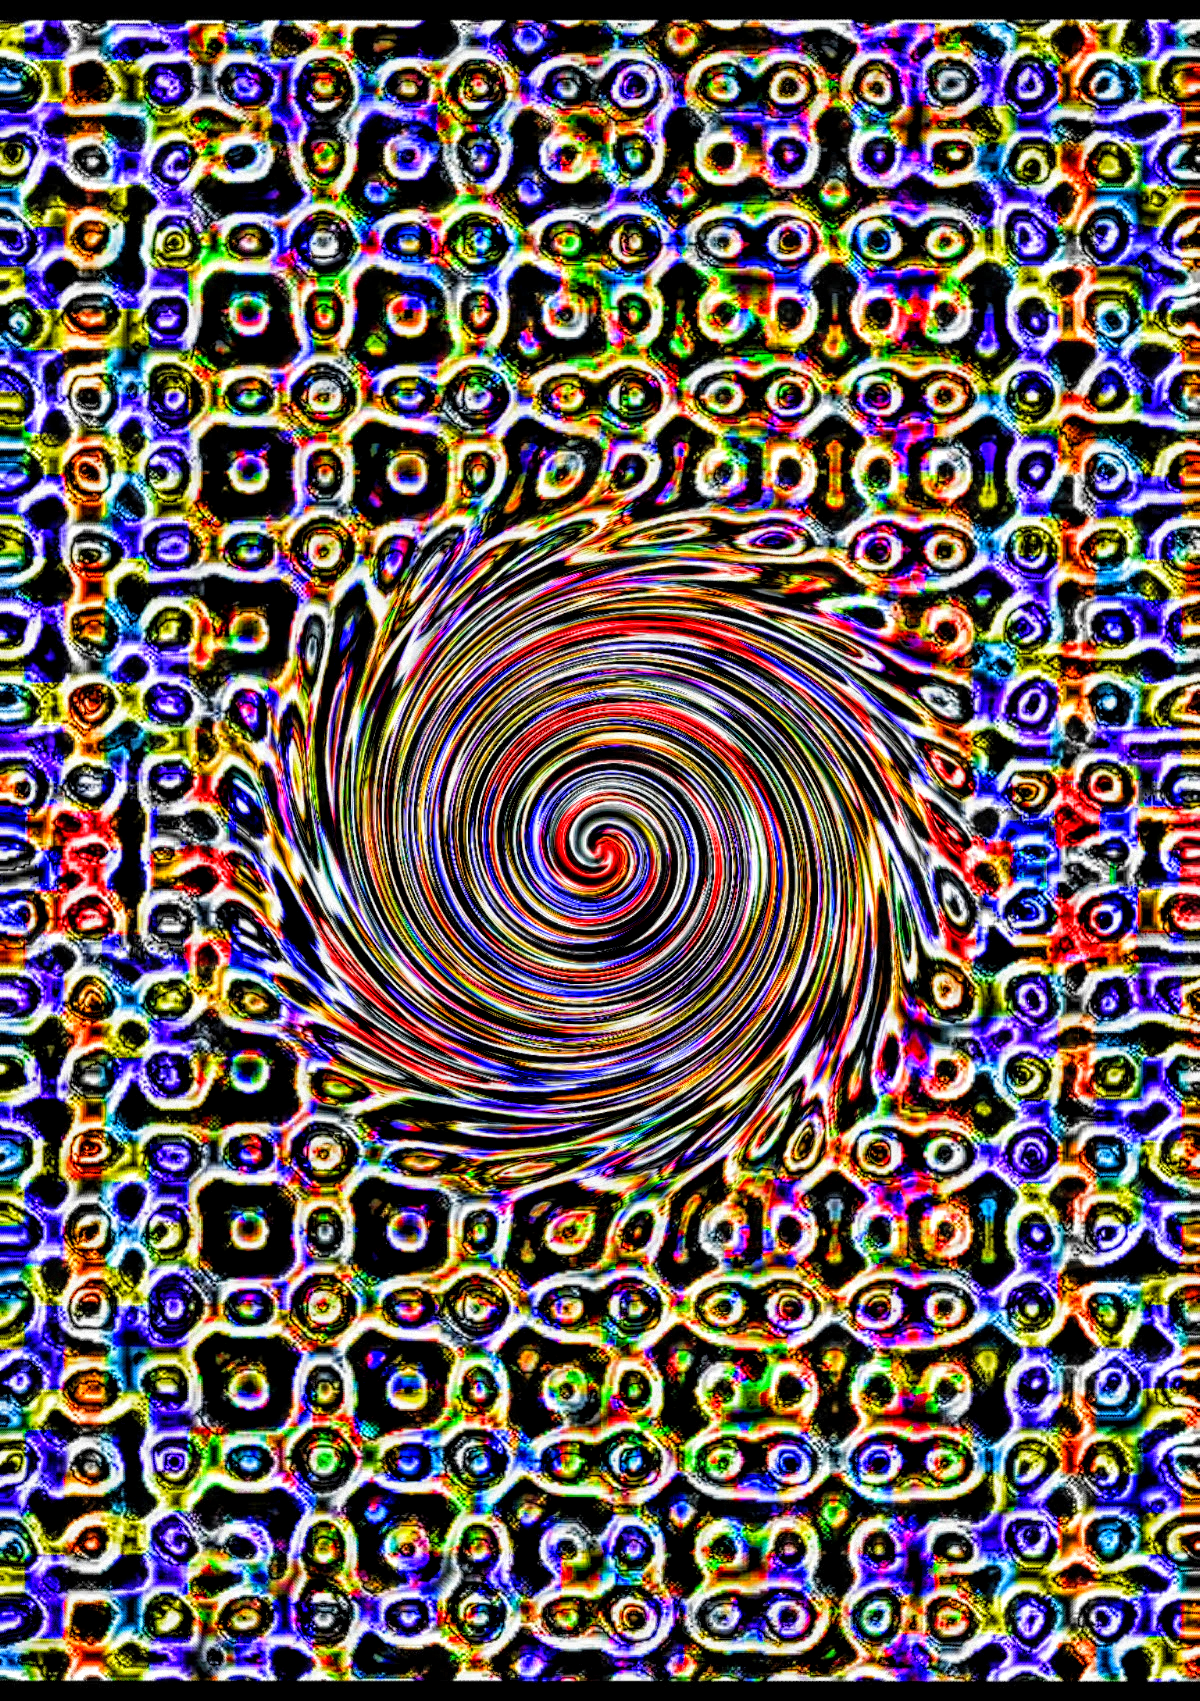 Spiral art created by Oregonleatherboy PPPimp